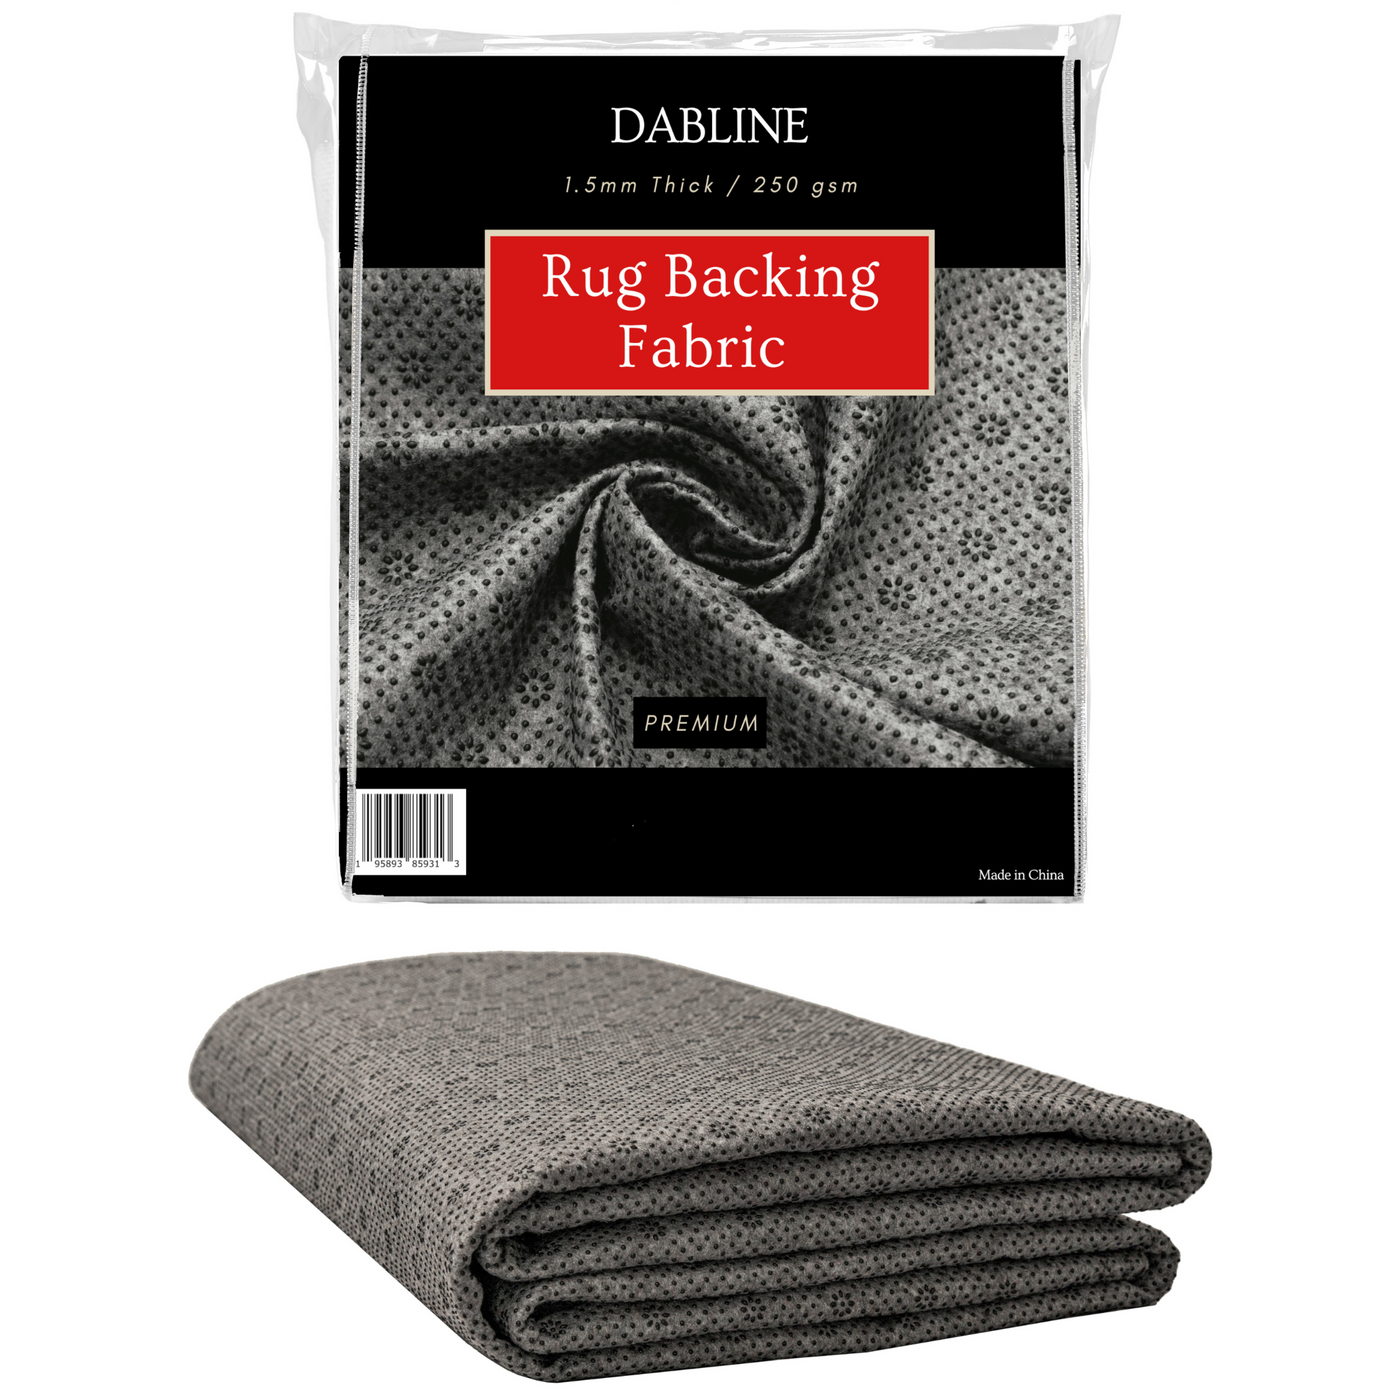 Backing Fabric with Grippy Non Slip Rubber Dots